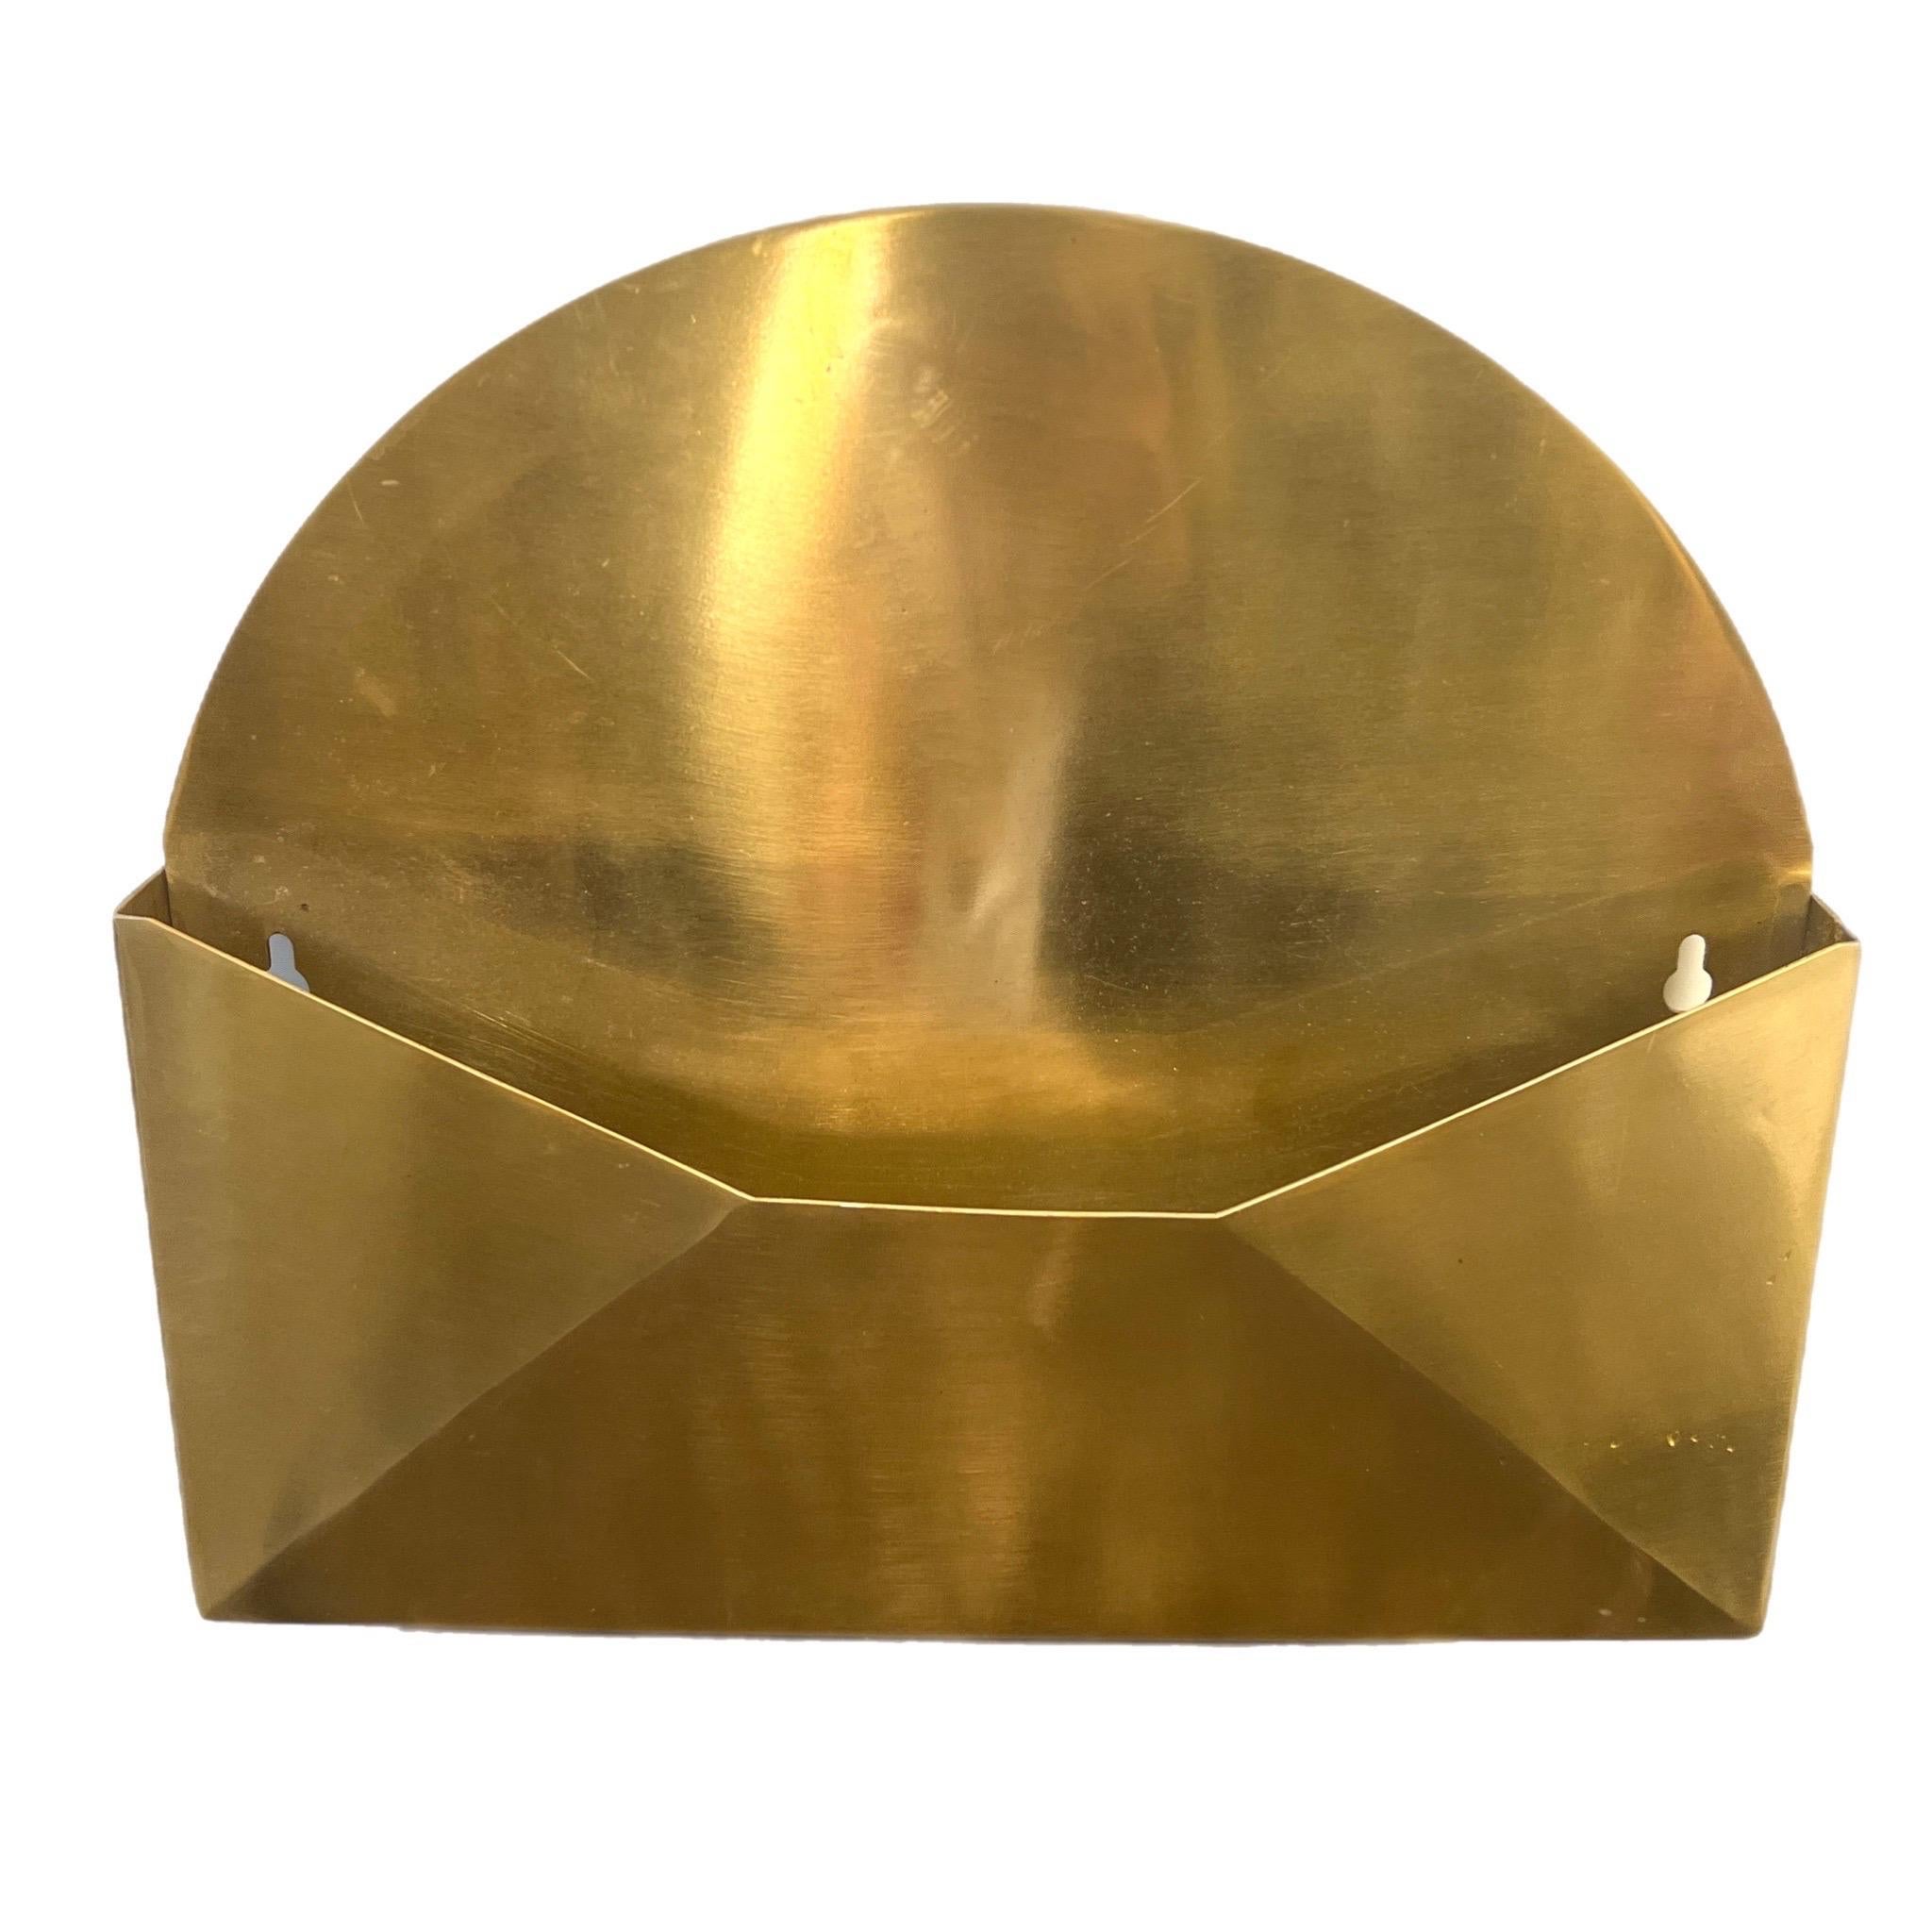 This fabulous brass mountable mail/letter holder is super chic and is a great representation of 1970’s pop art.   The envelope form holder does not have to be just for letters, I think it would look excellent hanging in the bathroom as a toothbrush